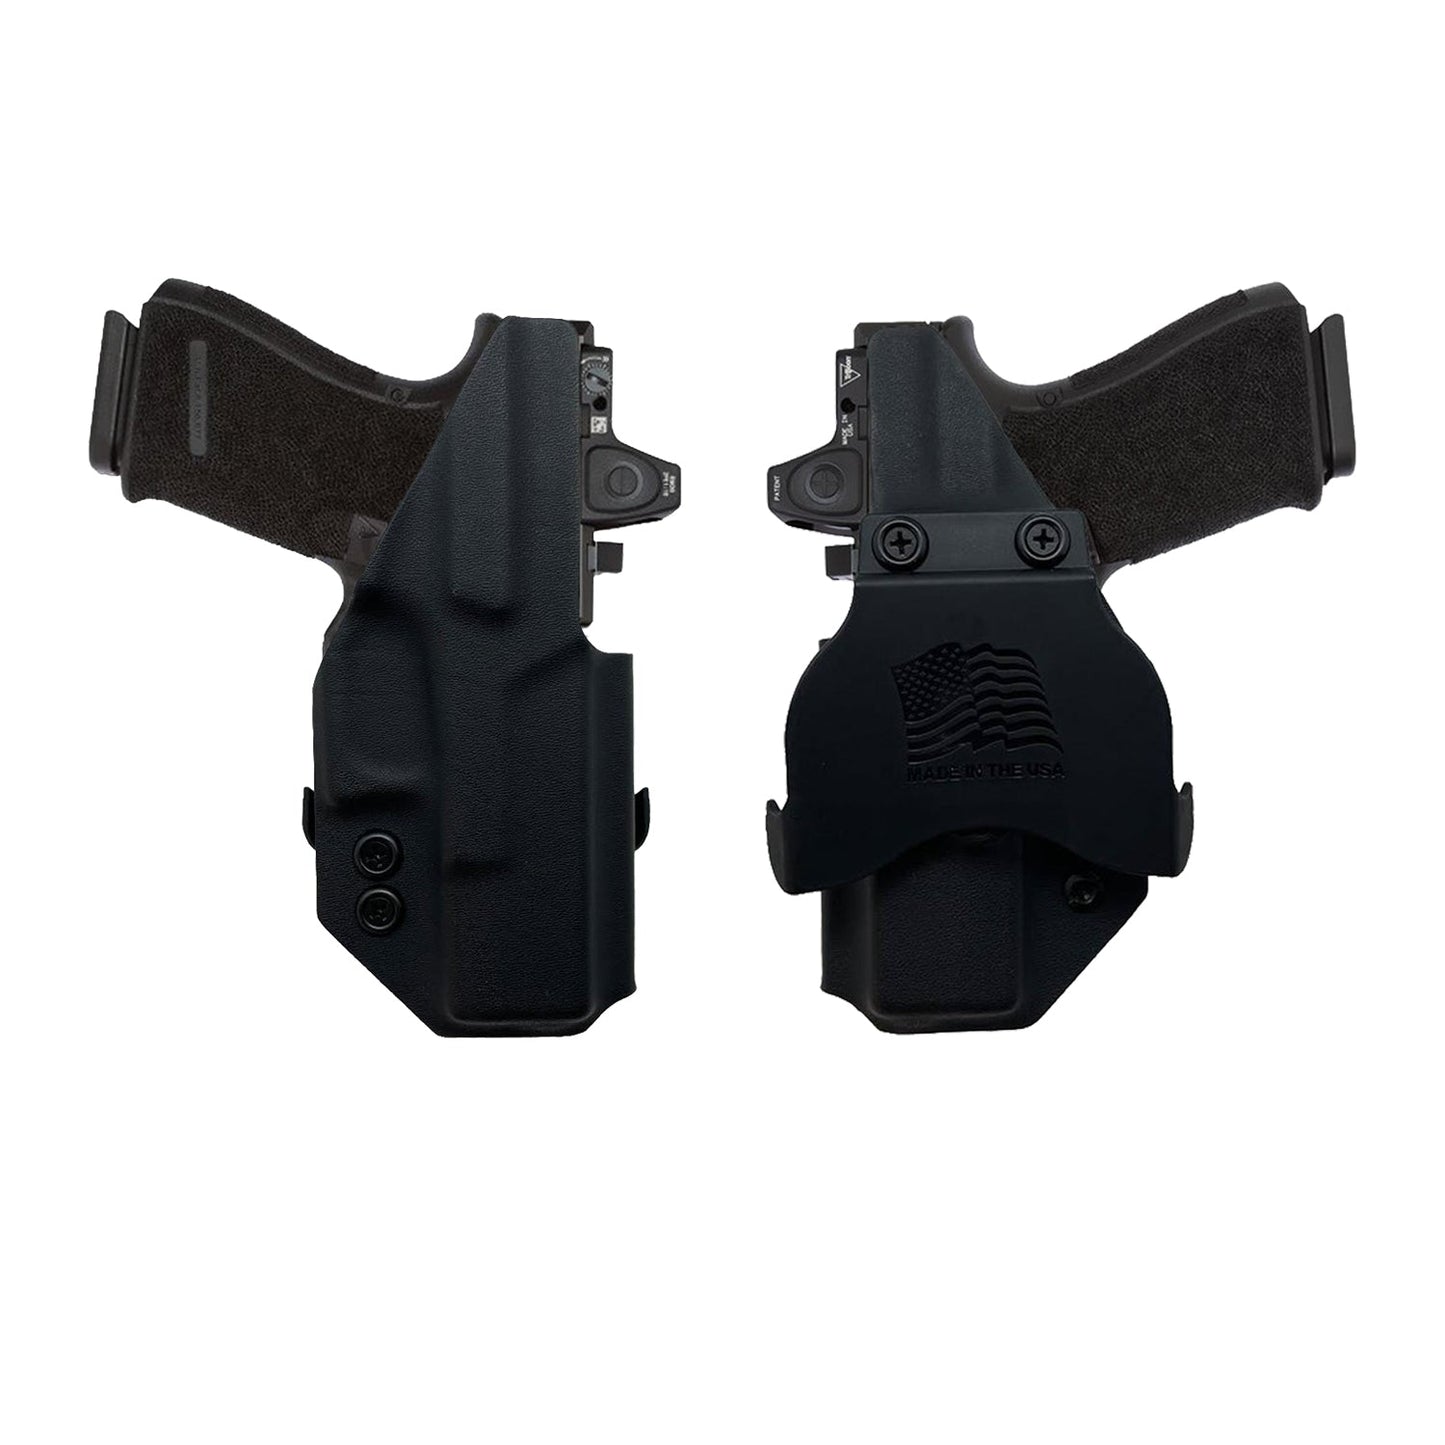 XD 3" OWB (Outside The Waistband Holster)